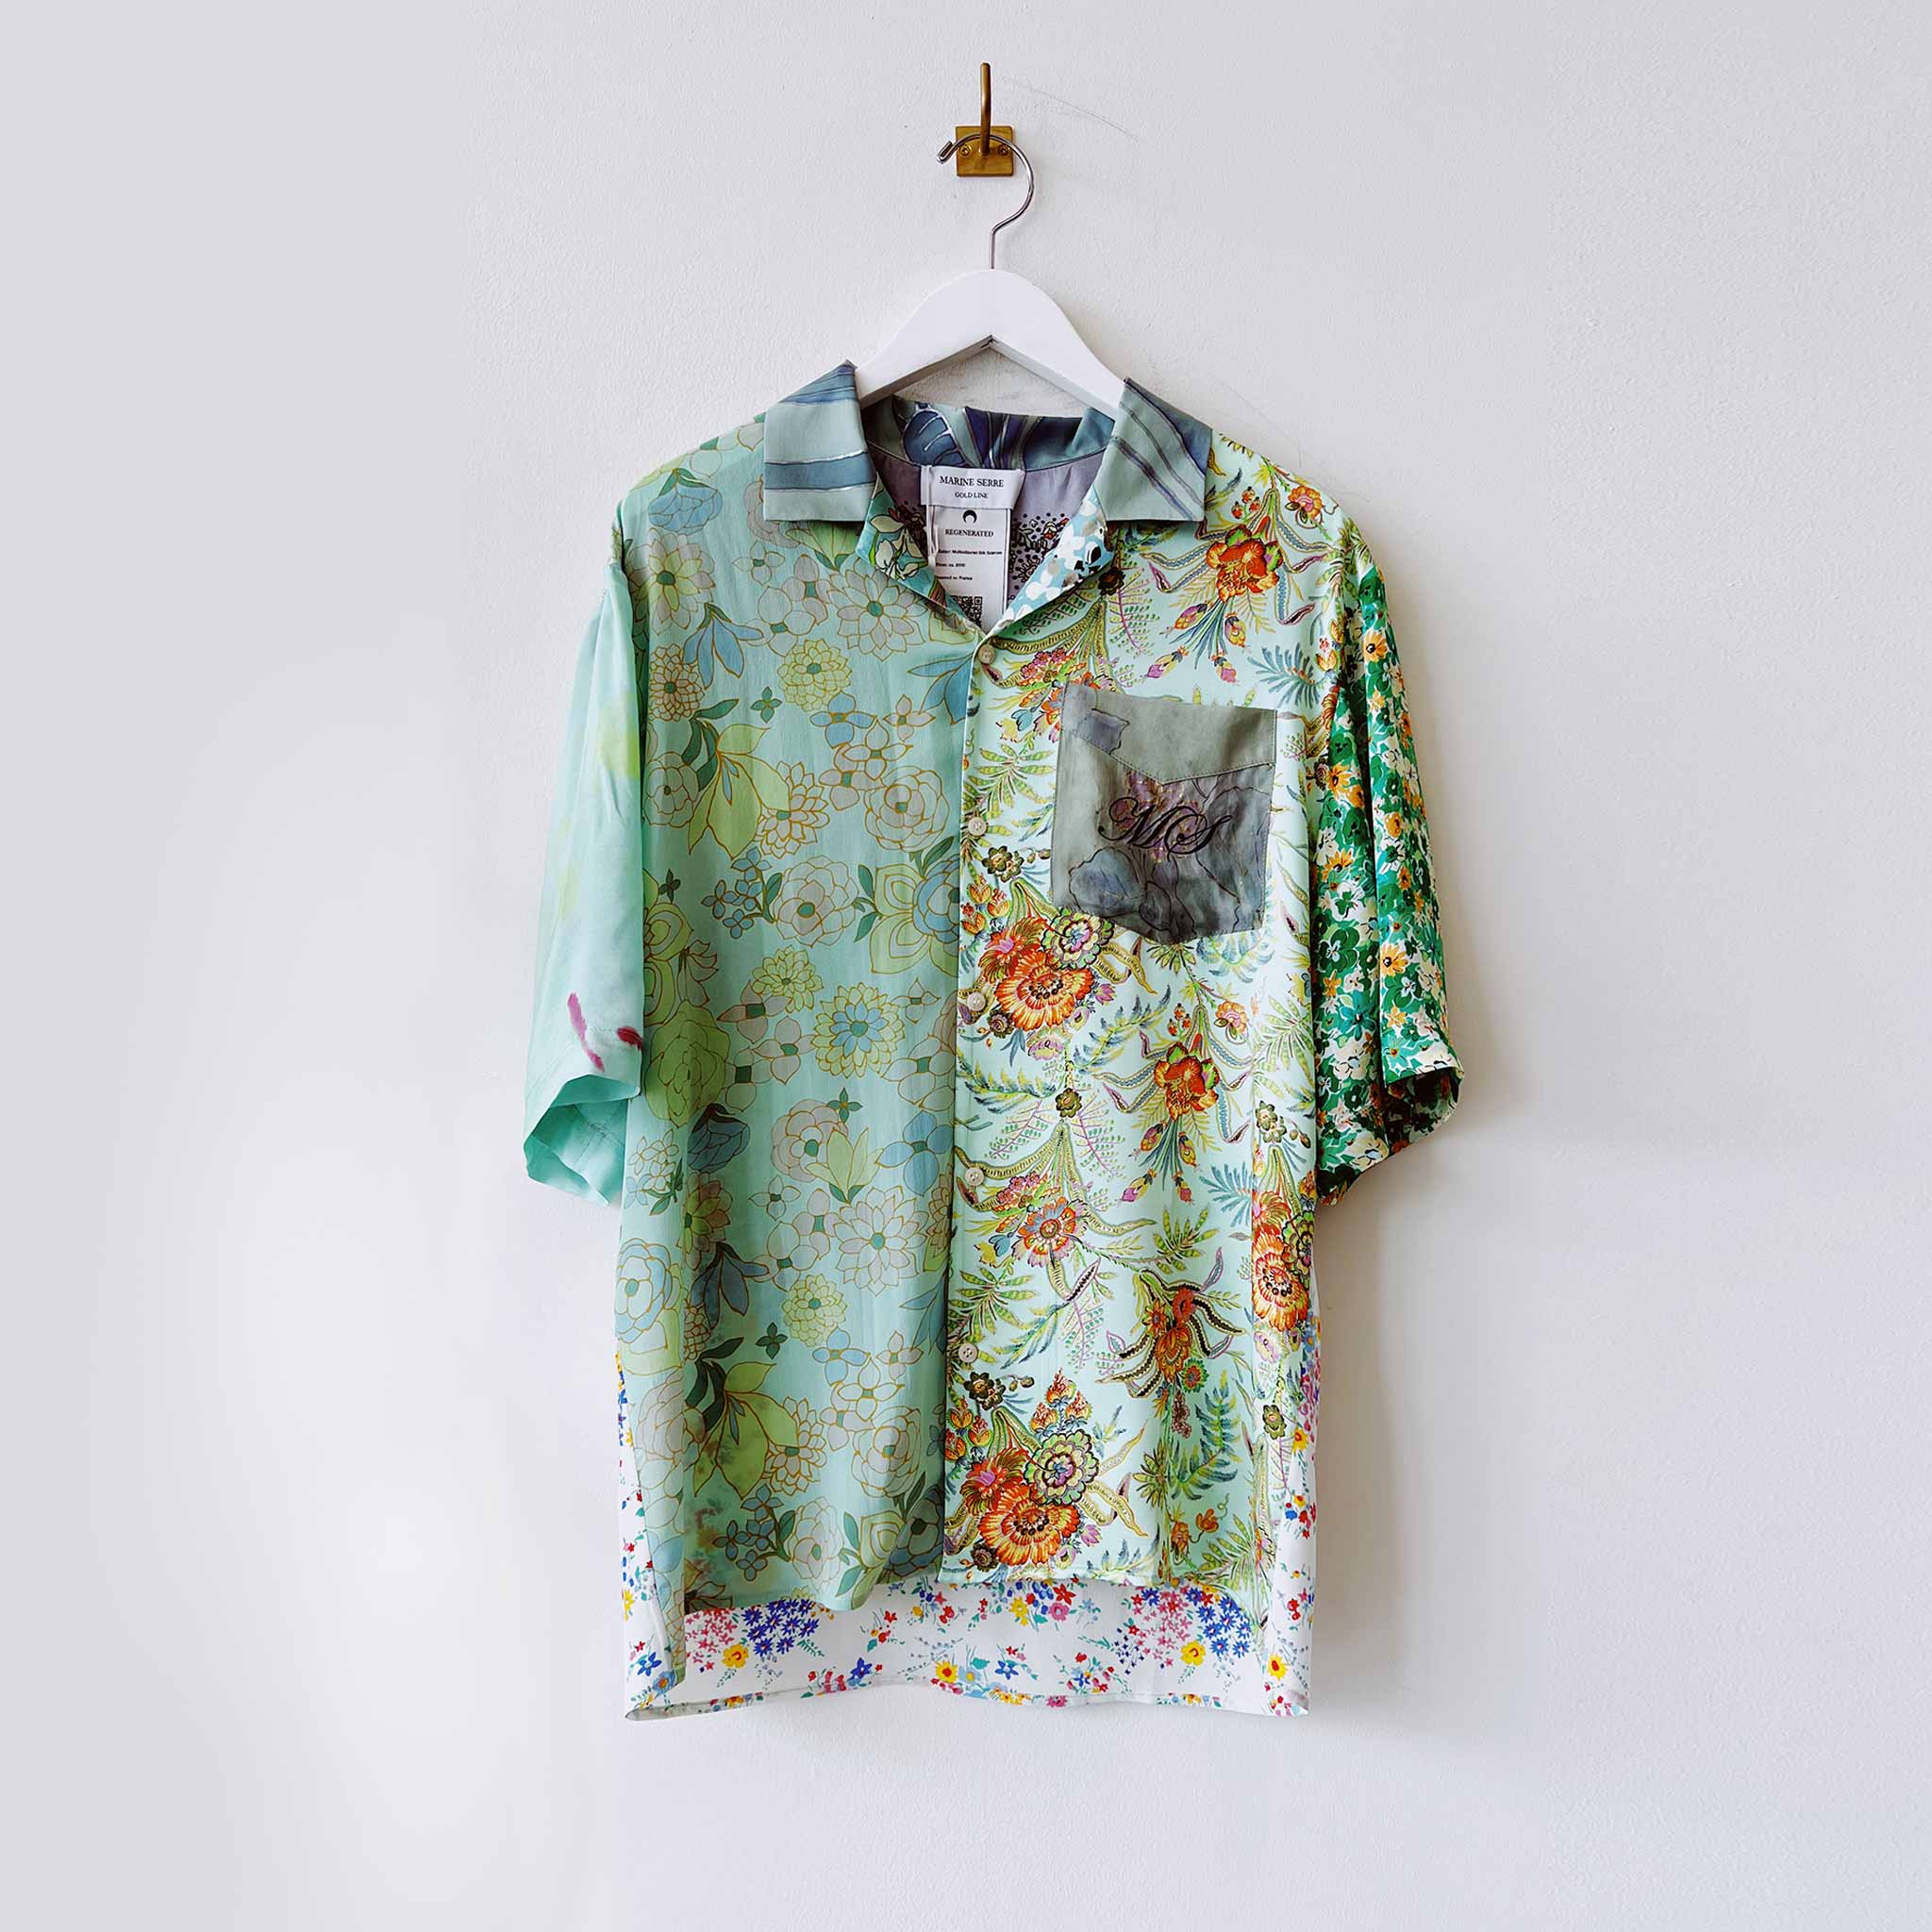 A silk bowling shirt created from multiple vintage scarves and overdyed in a seafoam green - front photo of XXS shirt.